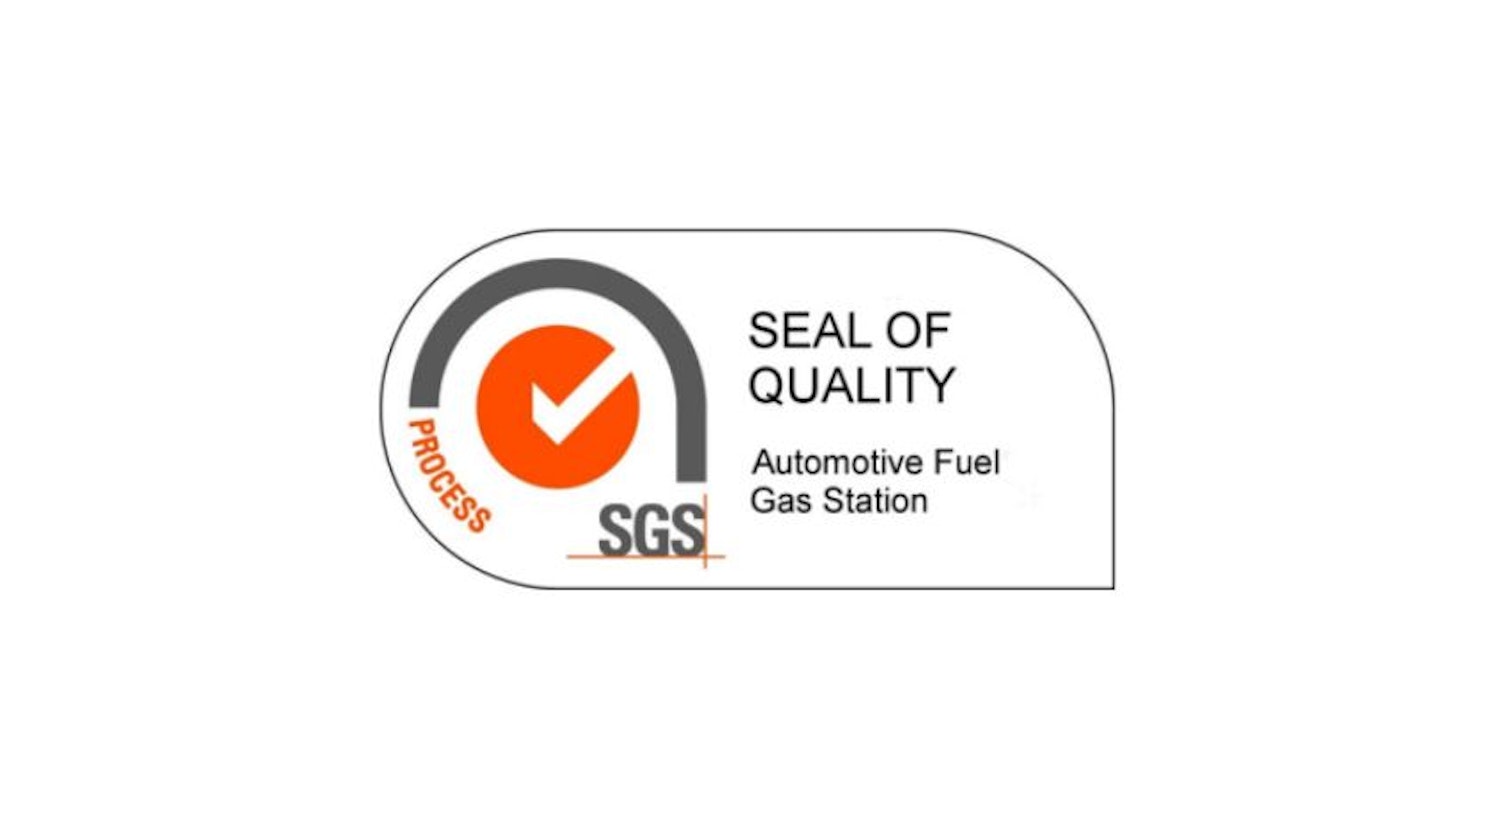 SGS Automotive Fuel Gas Station Seal of Quality